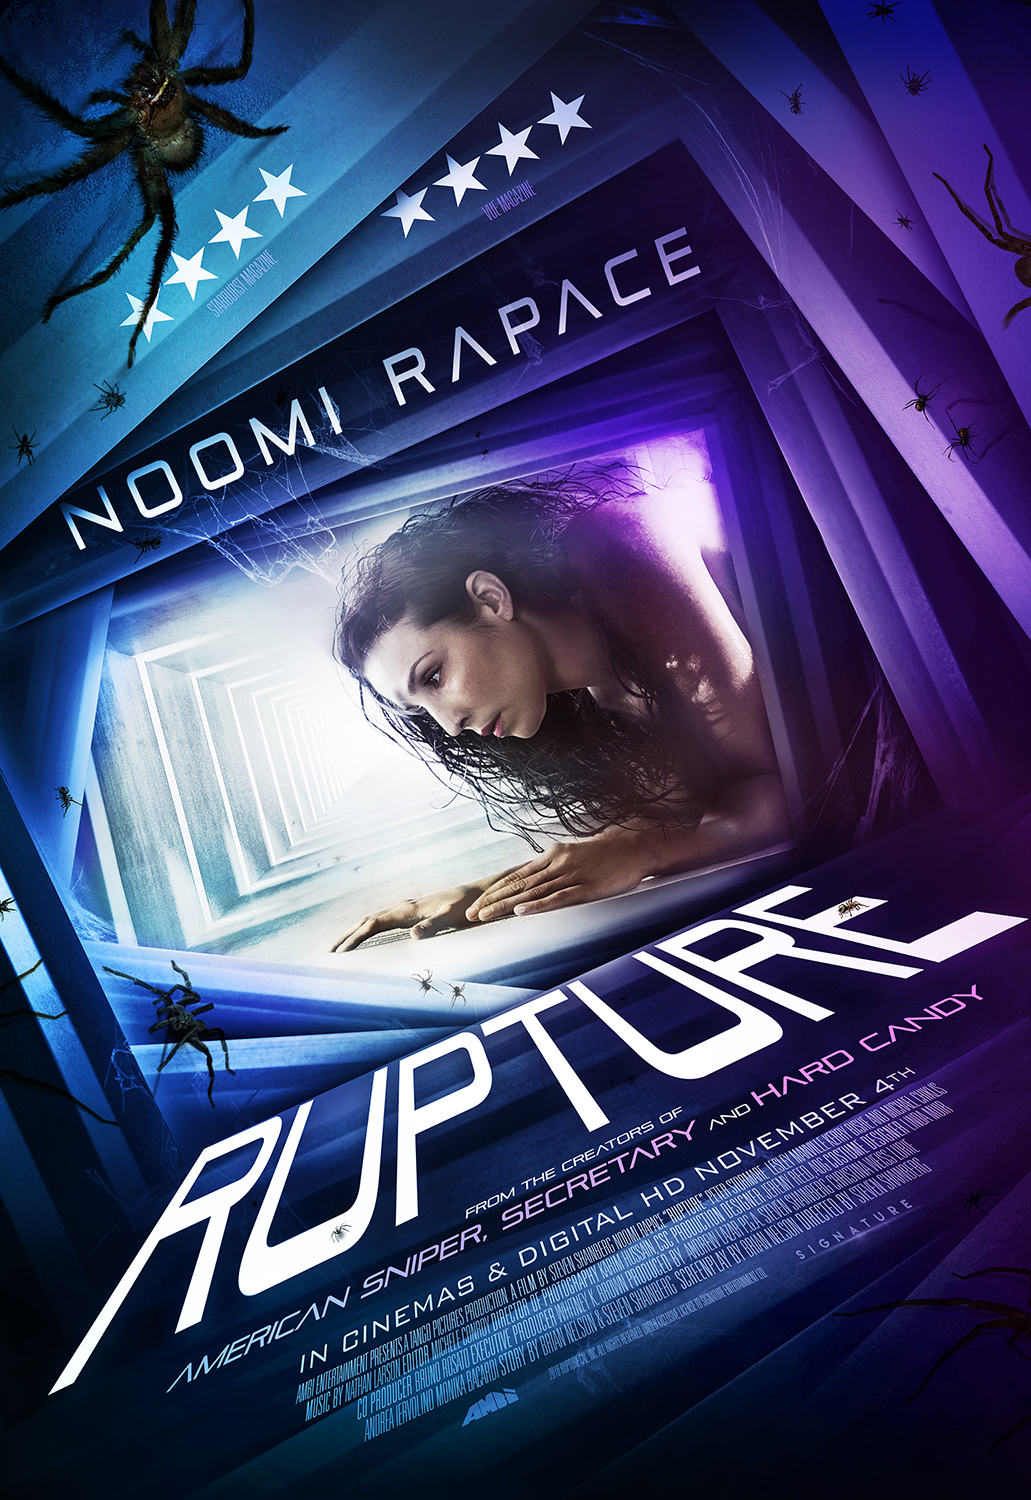 Rupture film review: The Girl Who Played With Spiders